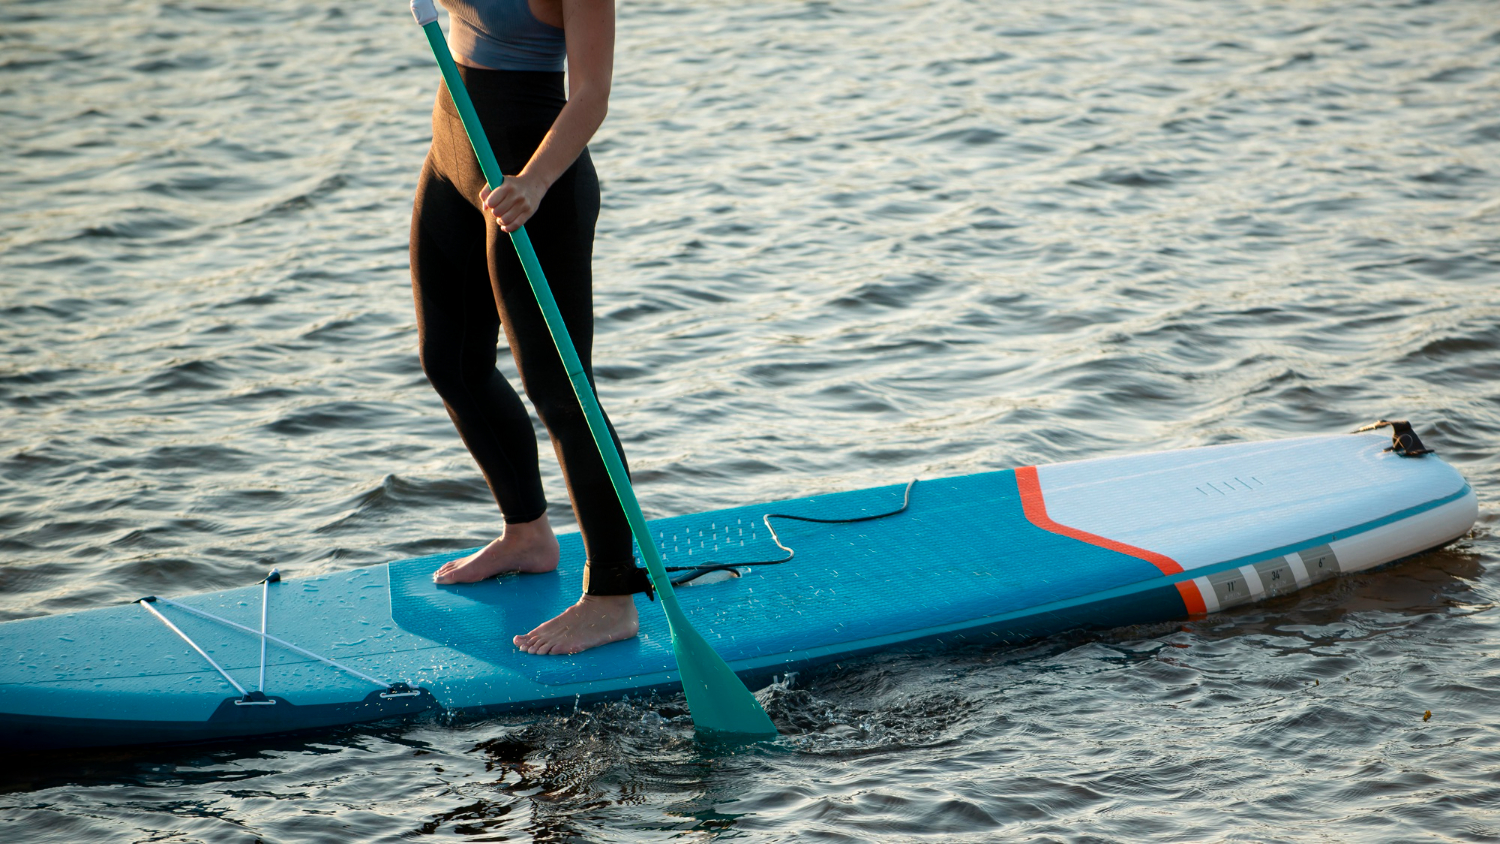 whats the best stand up paddle board to buy in Devon?